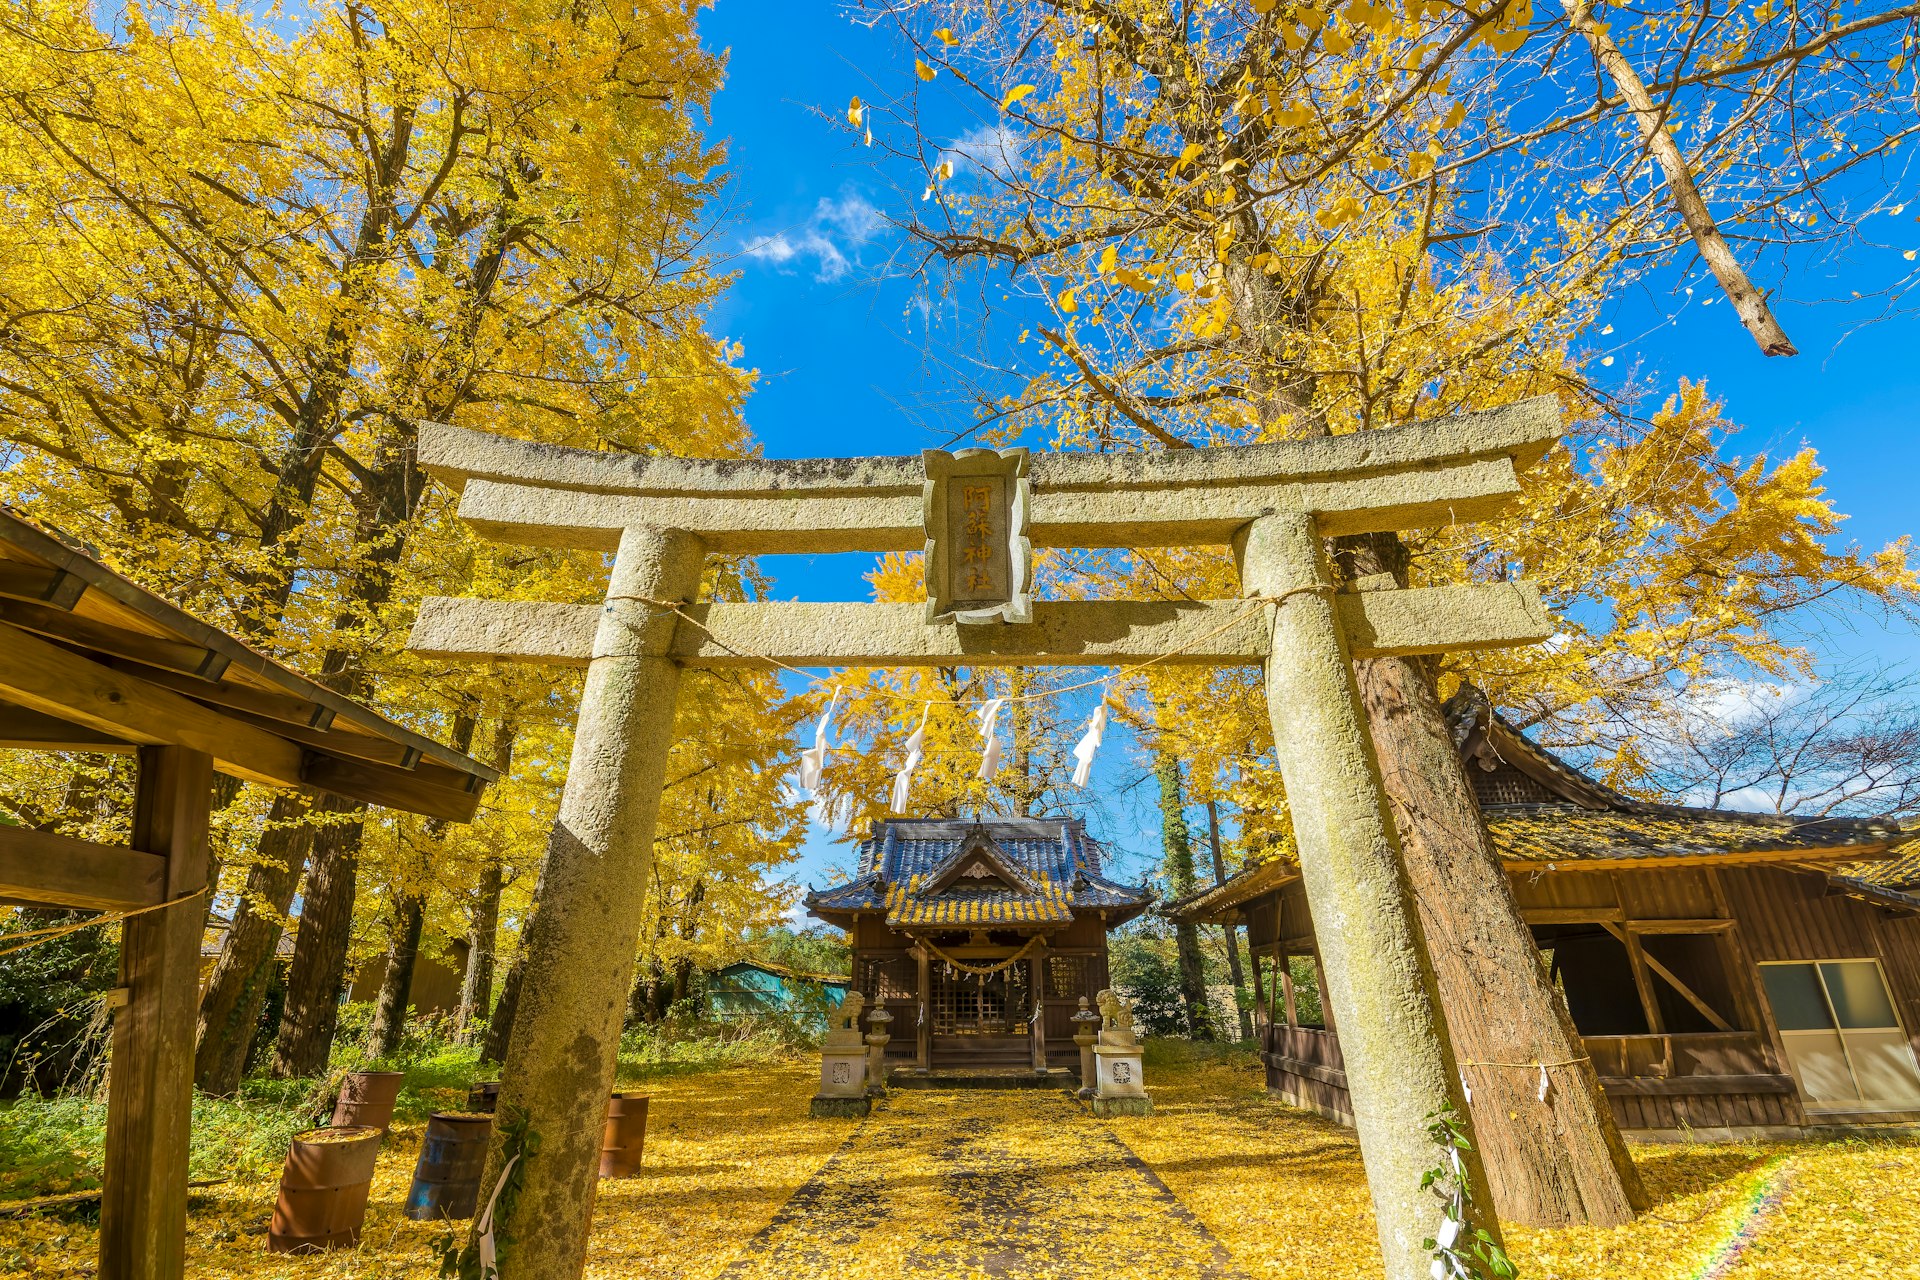 The torii gate at a shrine (with lettering that reads “Aso Shrine” in Japanese) framed by gingko trees in fall, Kyushu, Japan